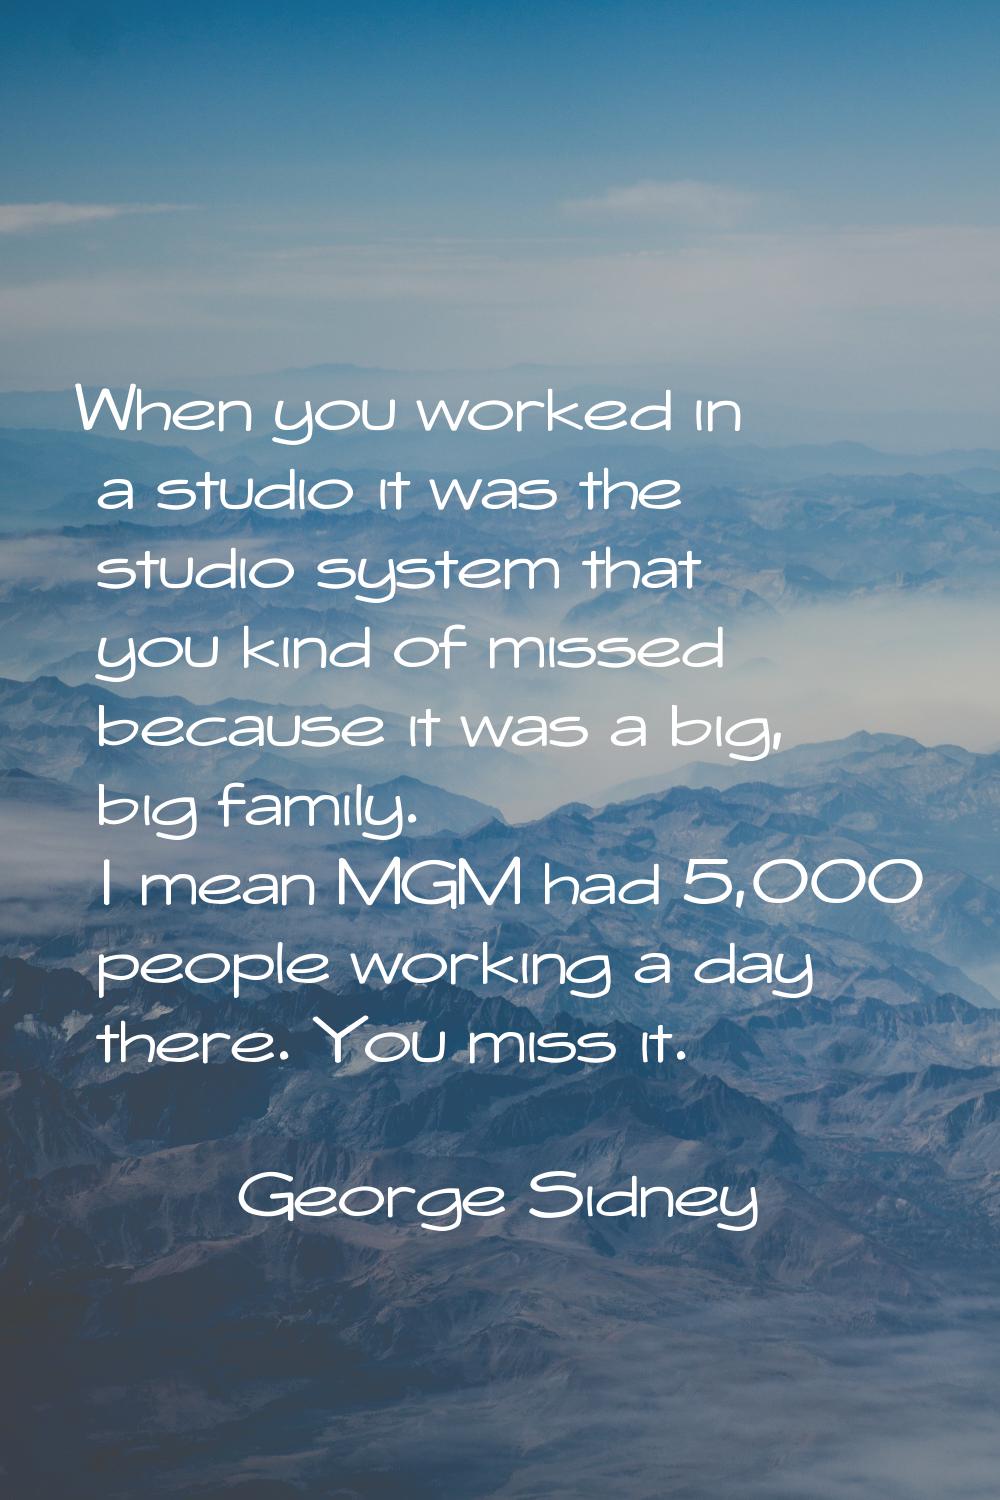 When you worked in a studio it was the studio system that you kind of missed because it was a big, 